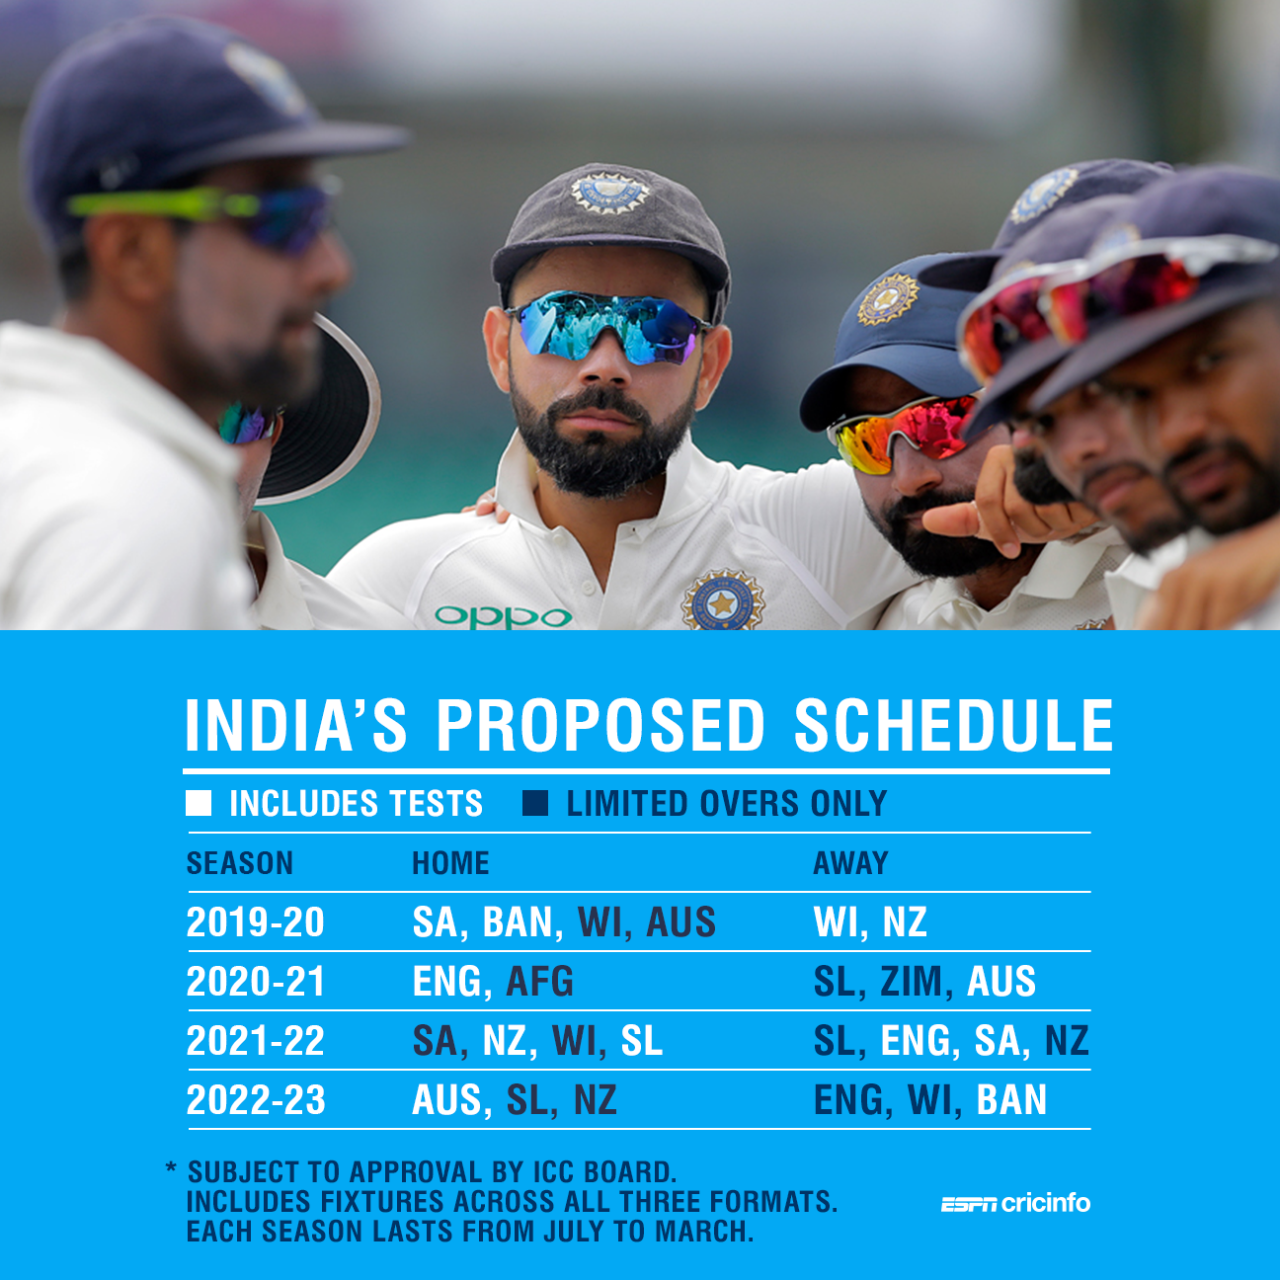 India will play nearly 65% of all their Tests against Australia, England and South Africa